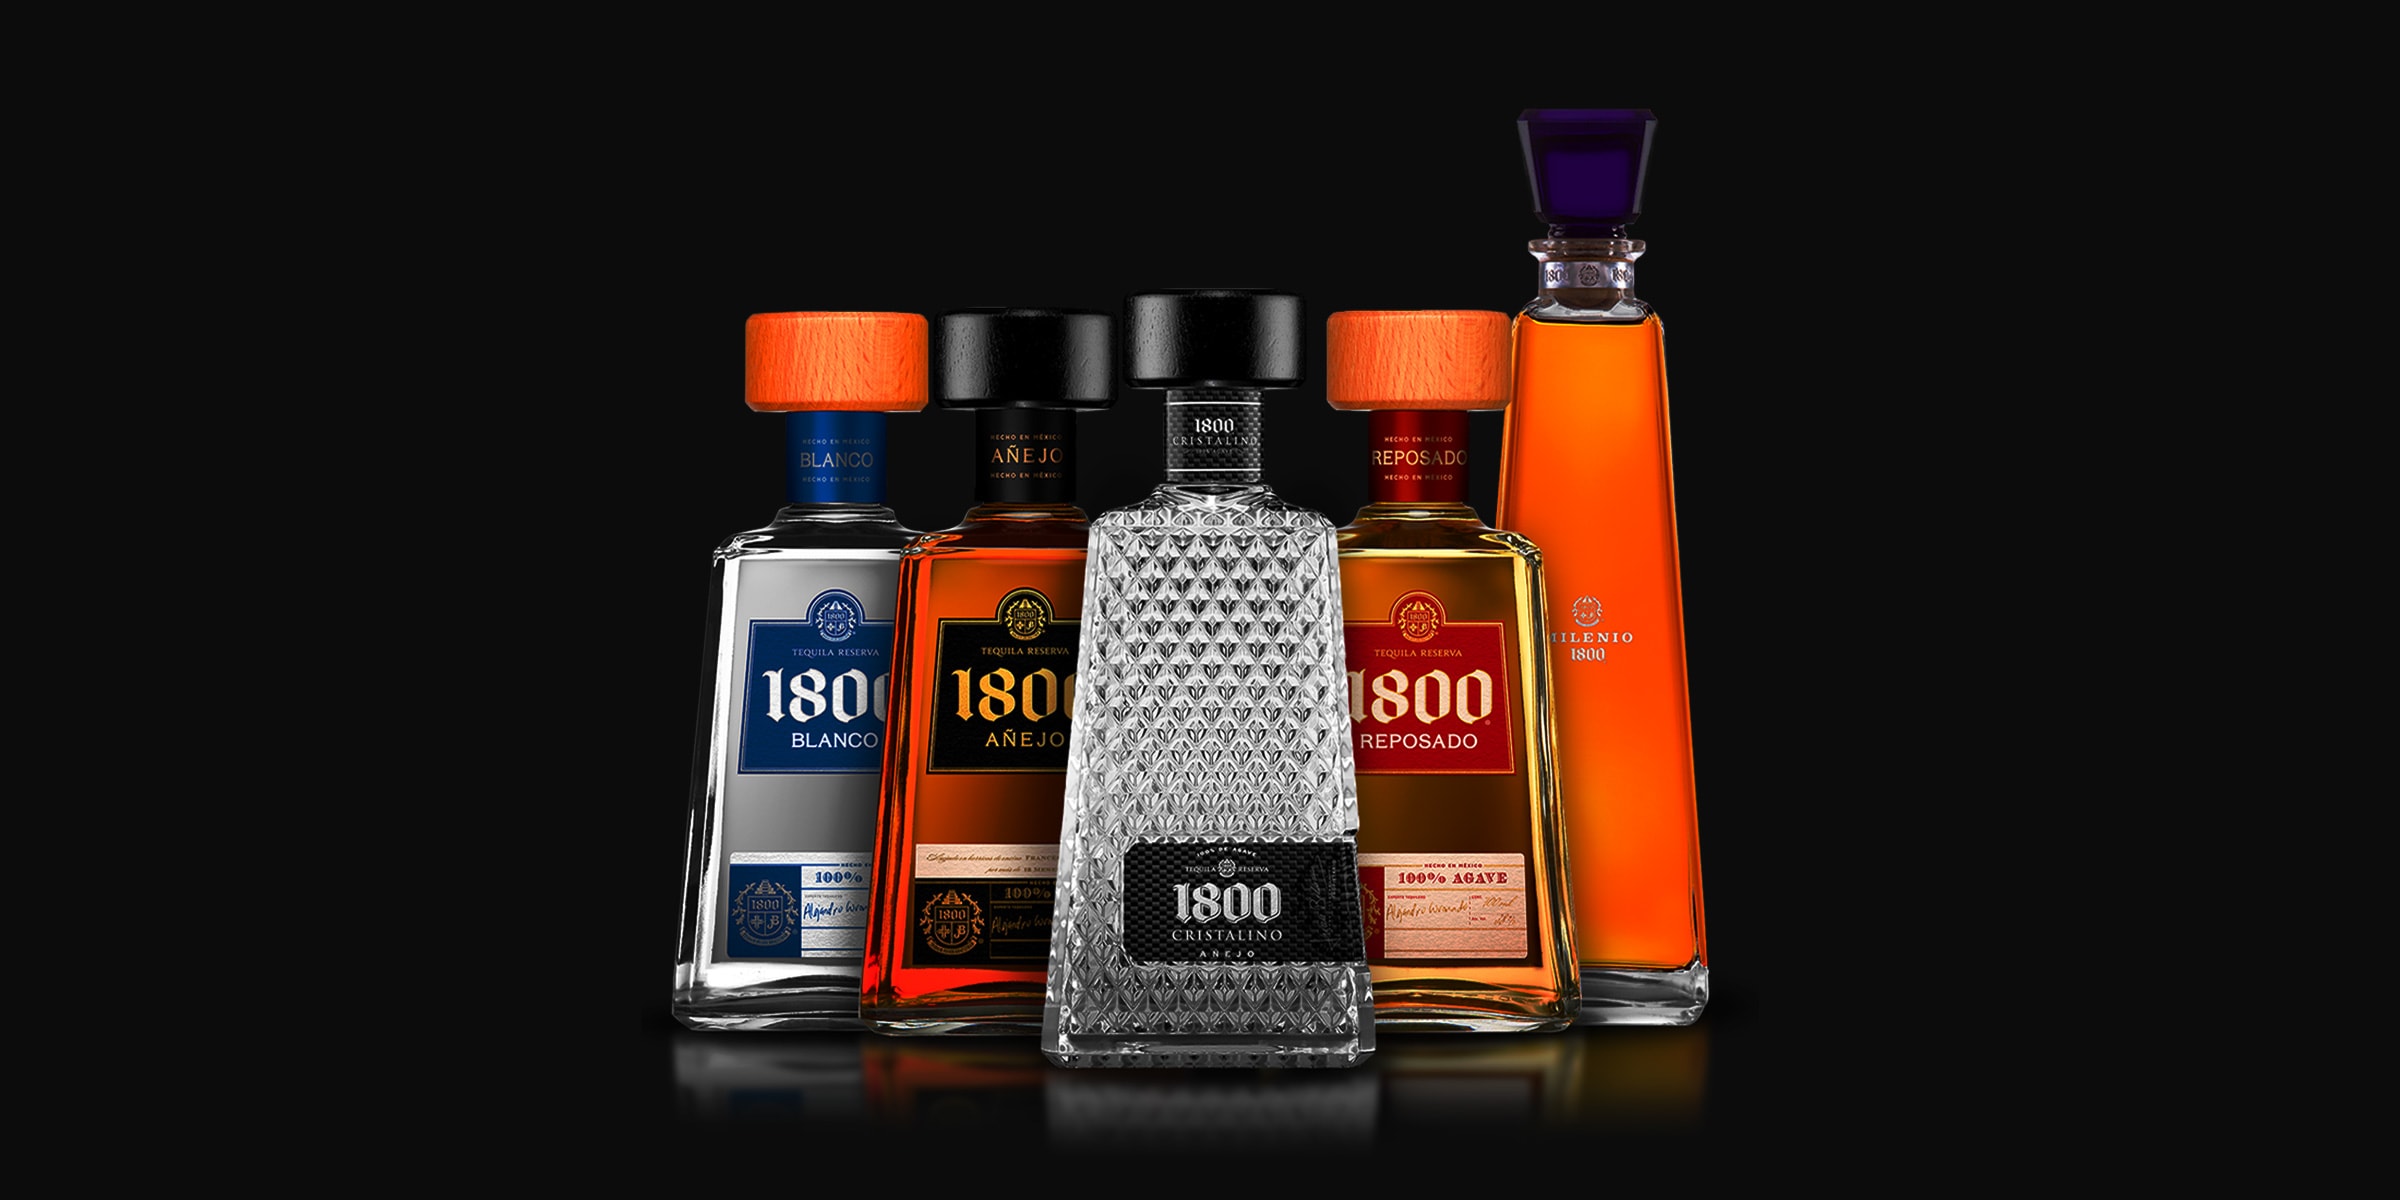 1800 tequila bottle price size review luxe